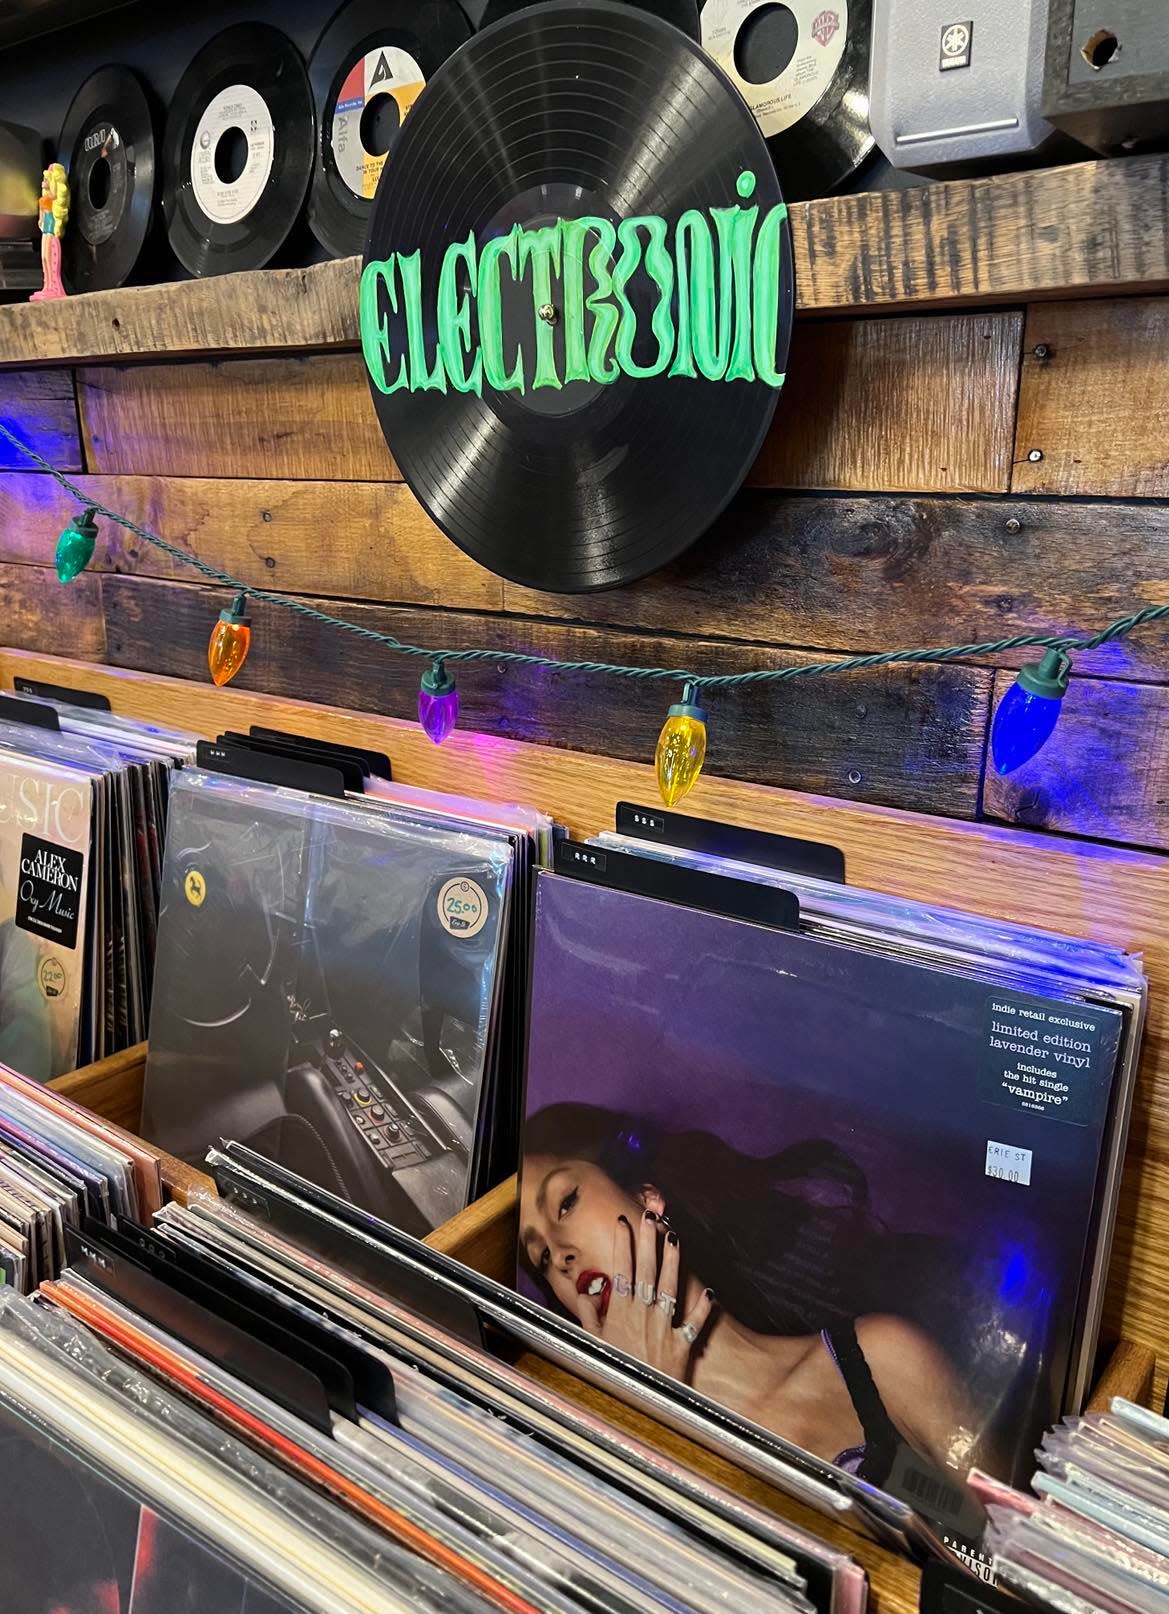 Vinyl releases from pop music artist Olivia Rodrigo are among the most popular at record stores like Erie St Vinyl in Massillon.